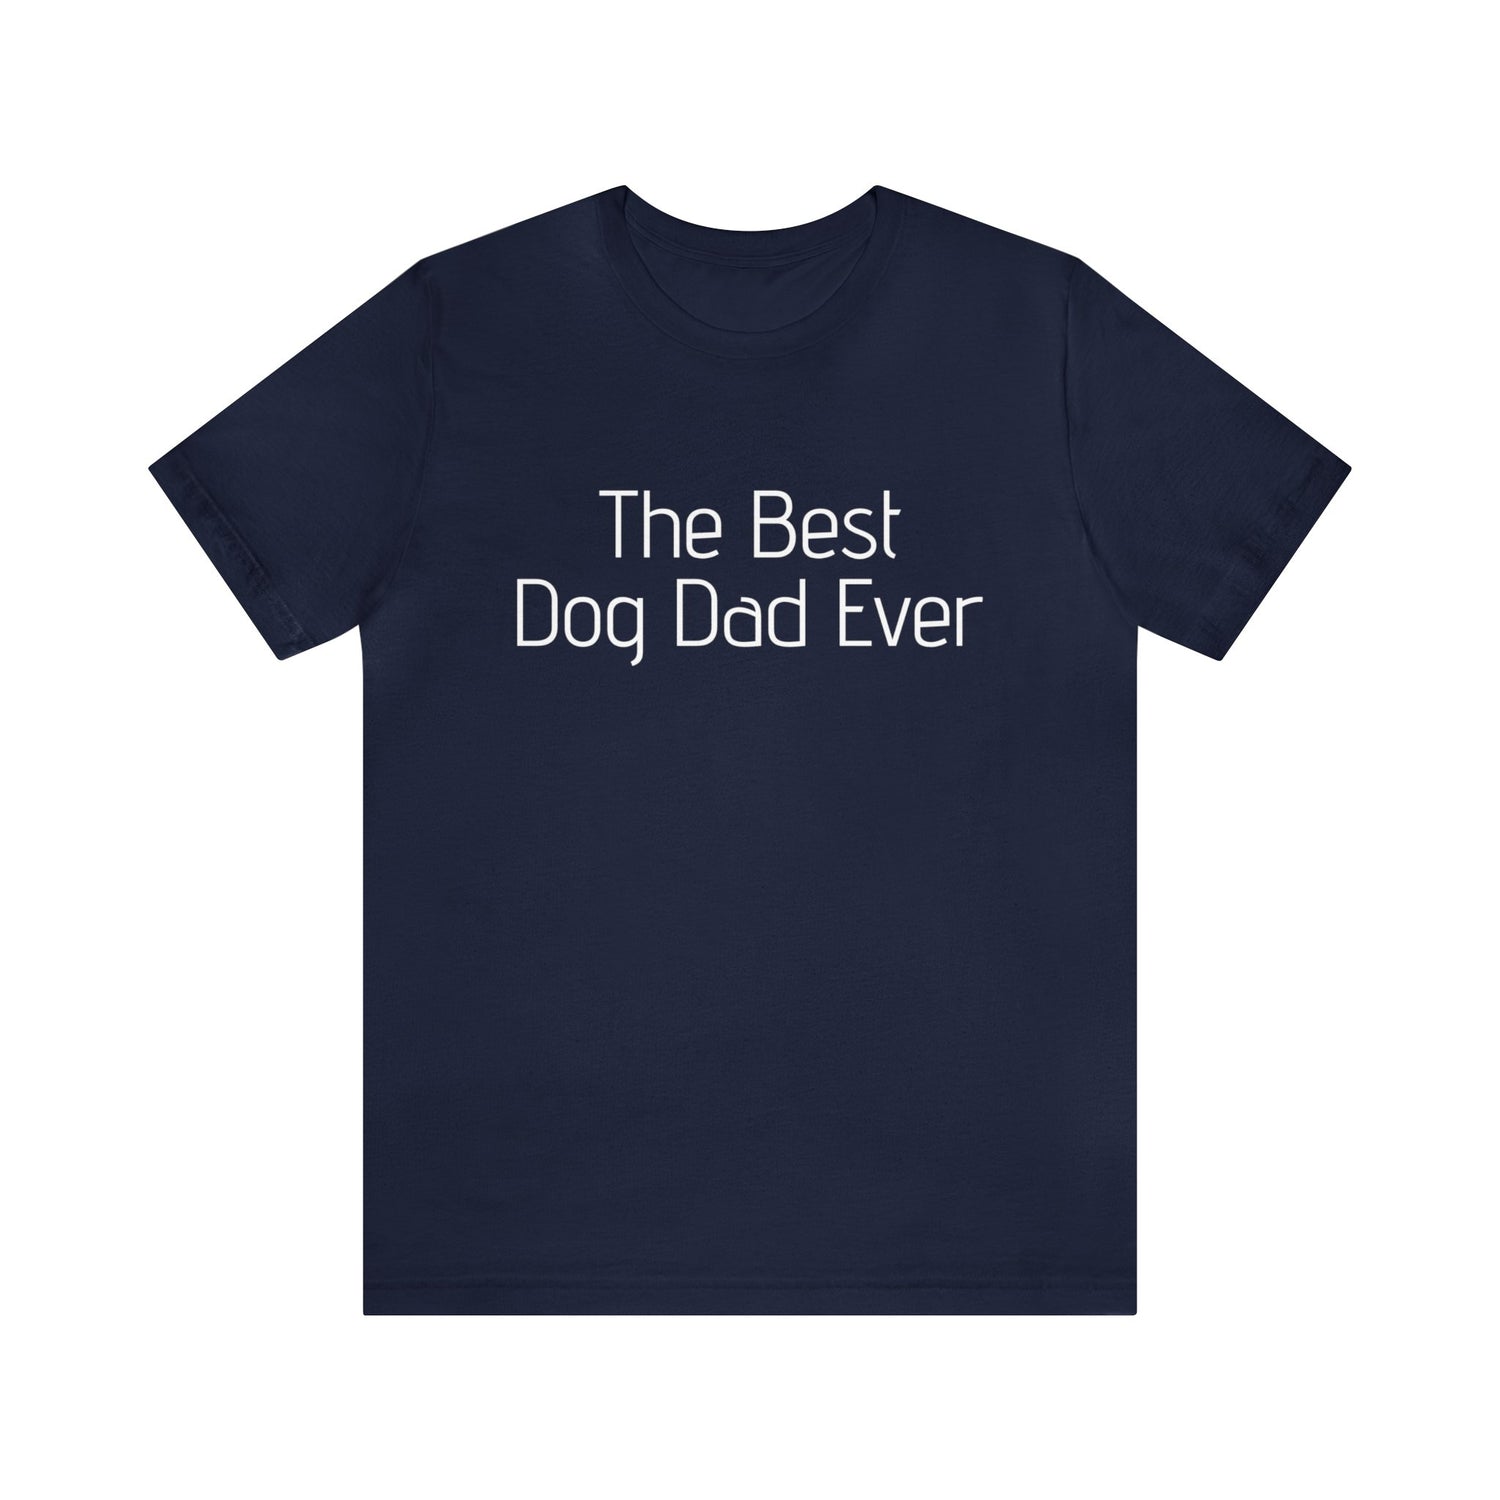 Navy T-Shirt Tshirt Design Gift for Friend and Family Short Sleeved Shirt for Dog Lovers Petrova Designs